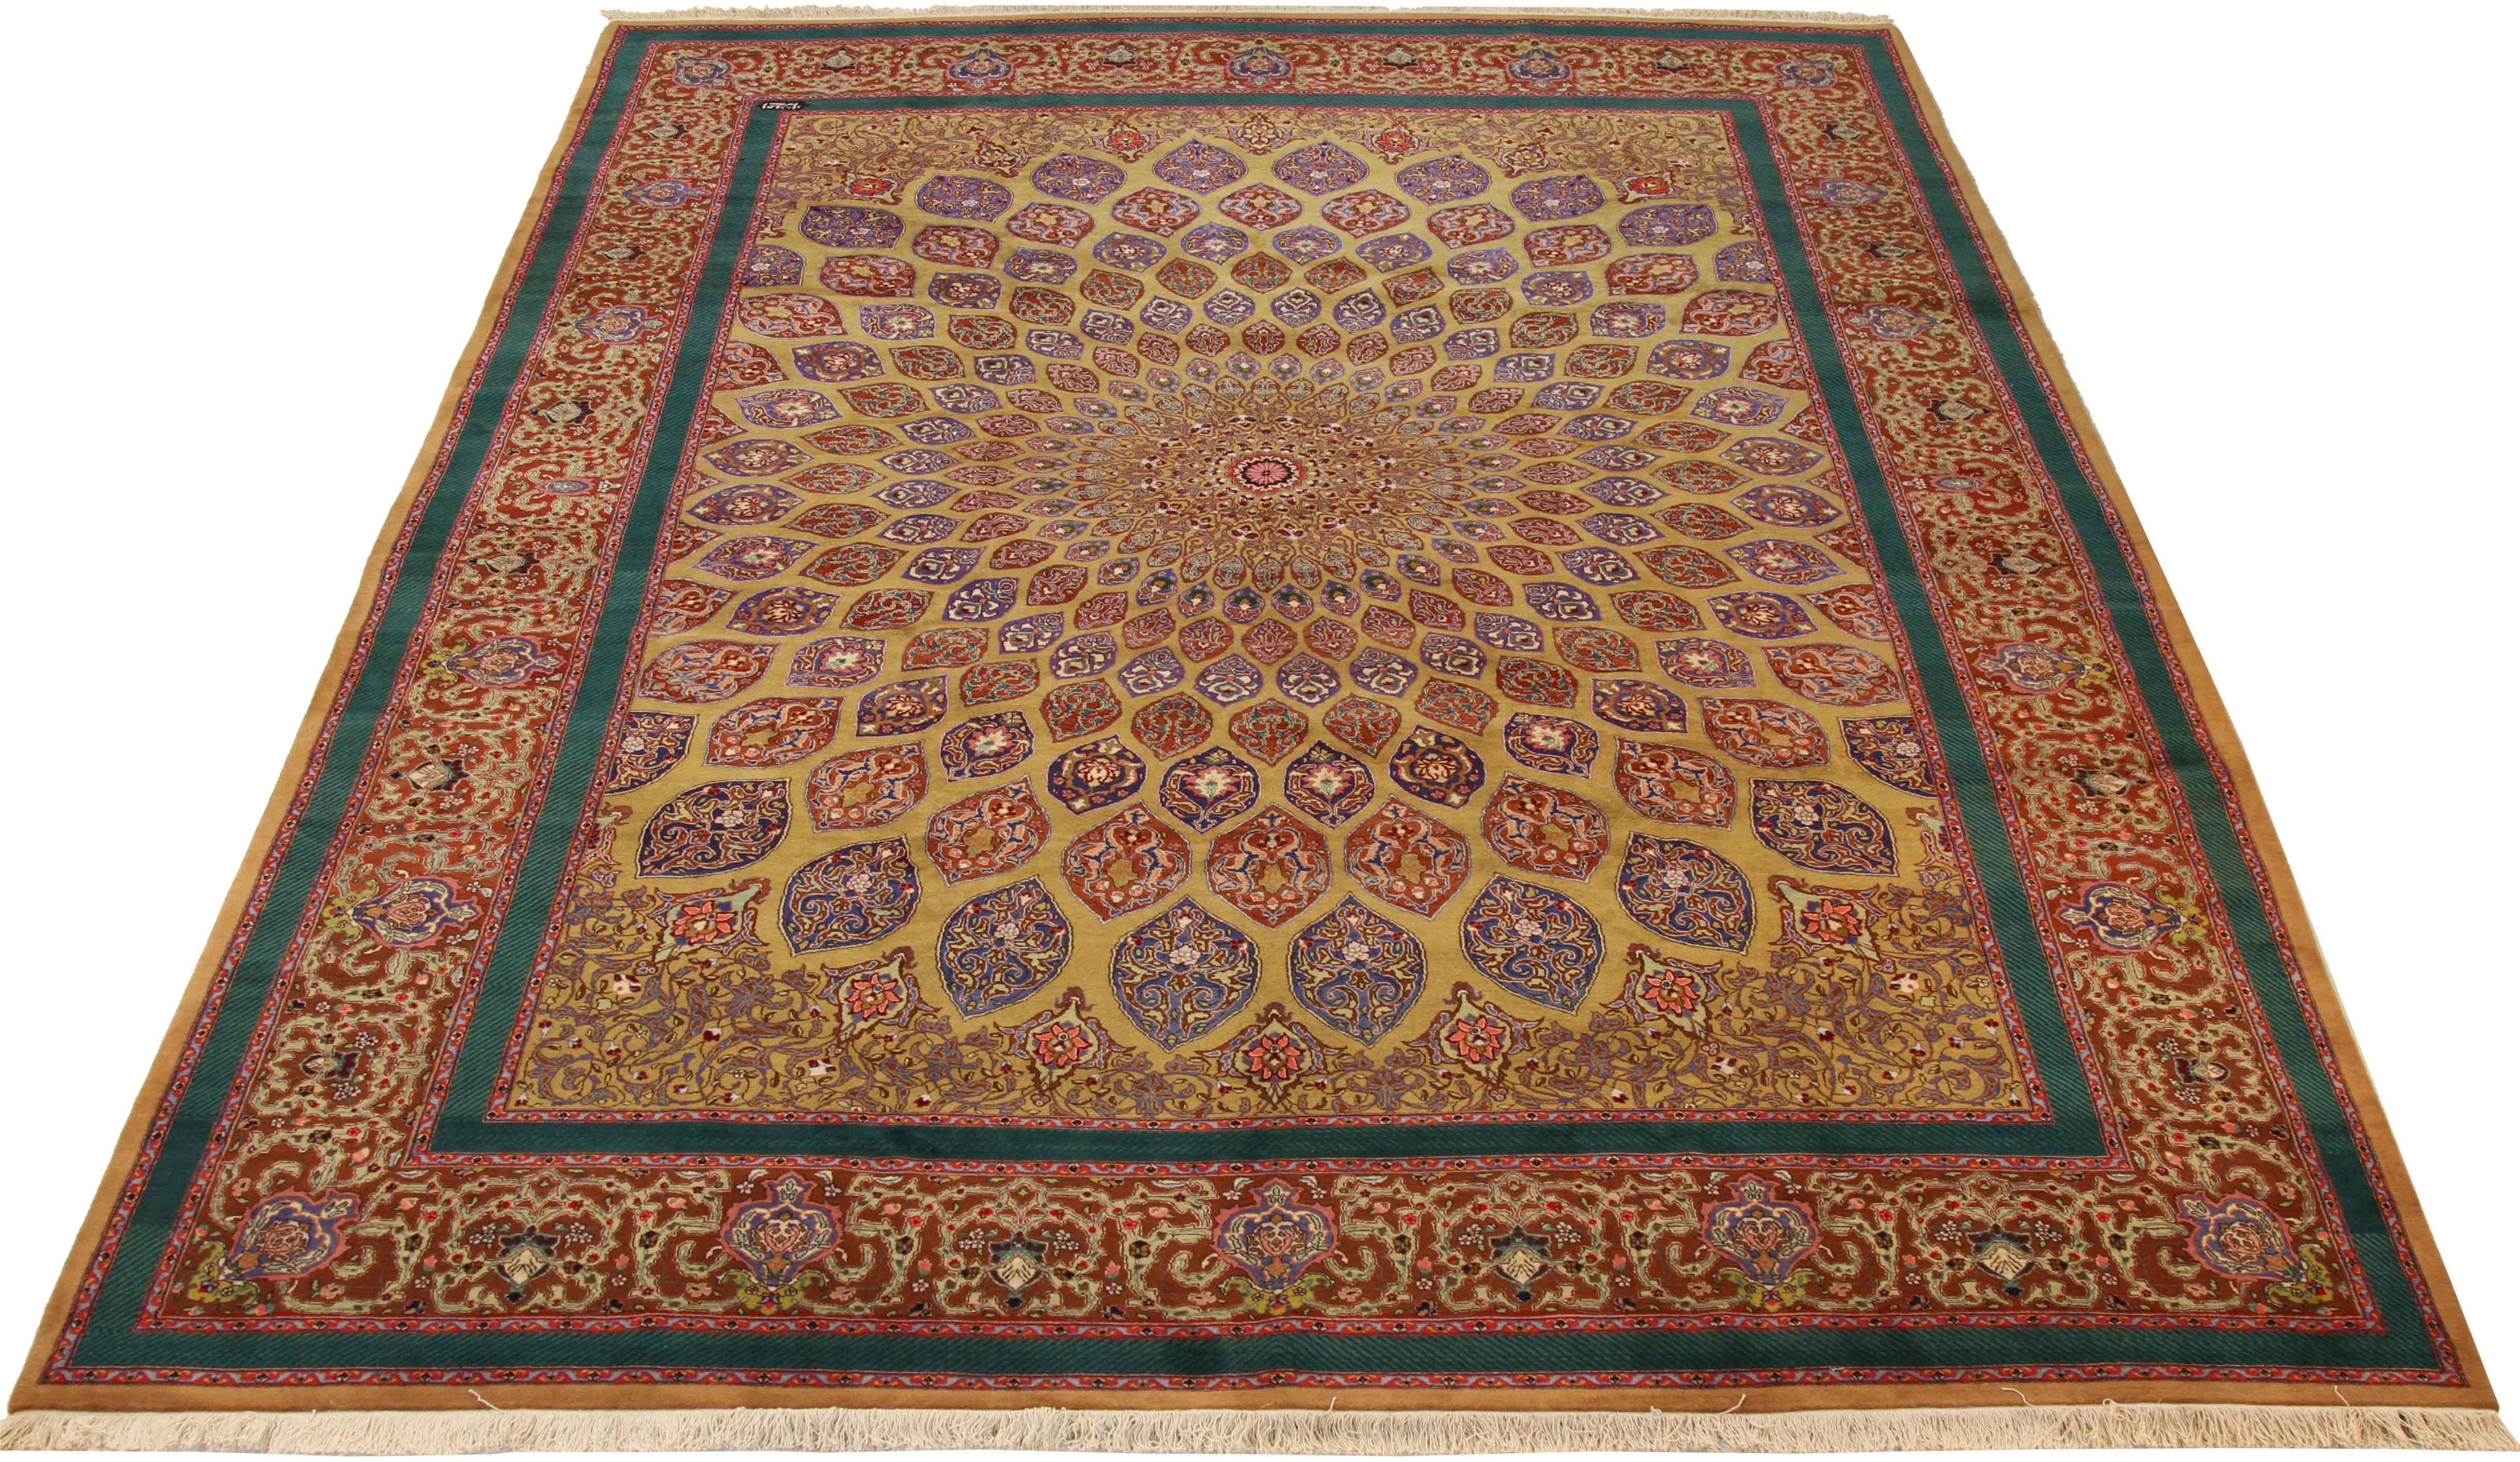 1970s Antique Tabriz Persian Rug with Circular Floral Motif in Green and Red In Excellent Condition For Sale In Dallas, TX